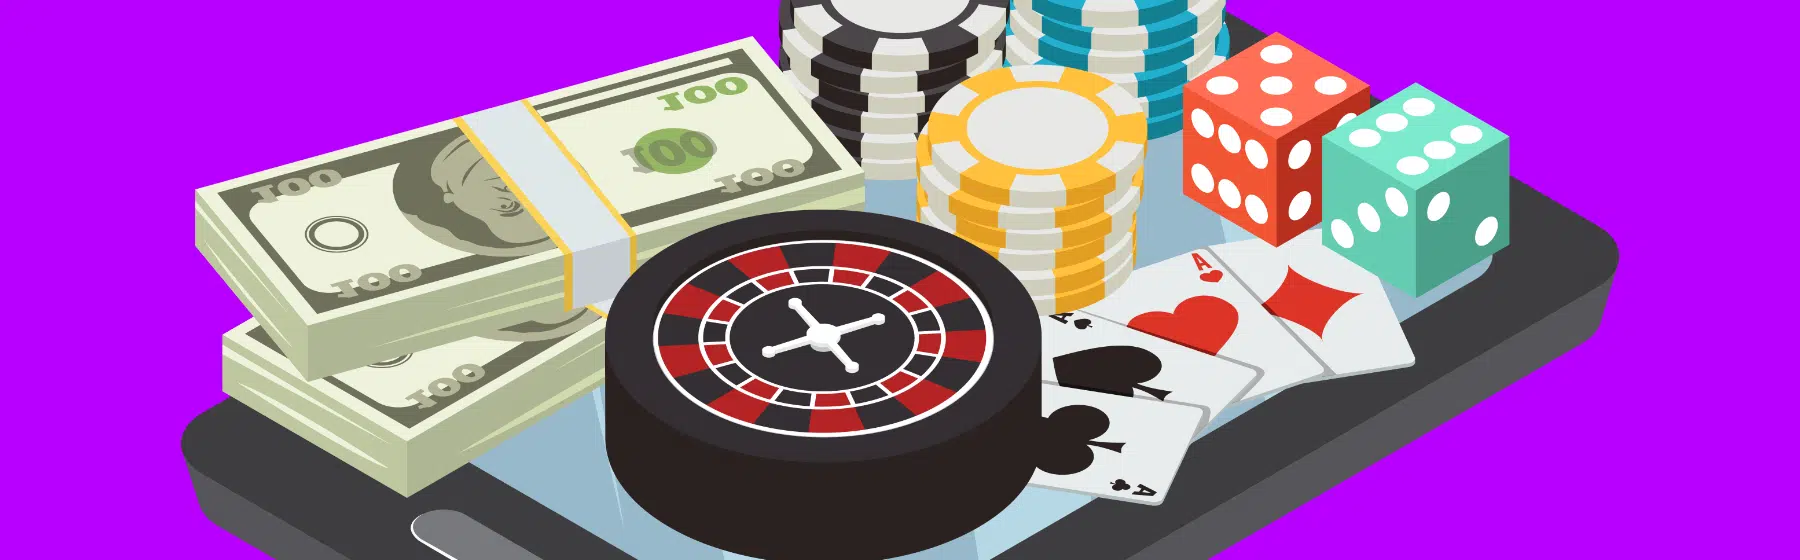 money, roulette wheel, dice and cards 